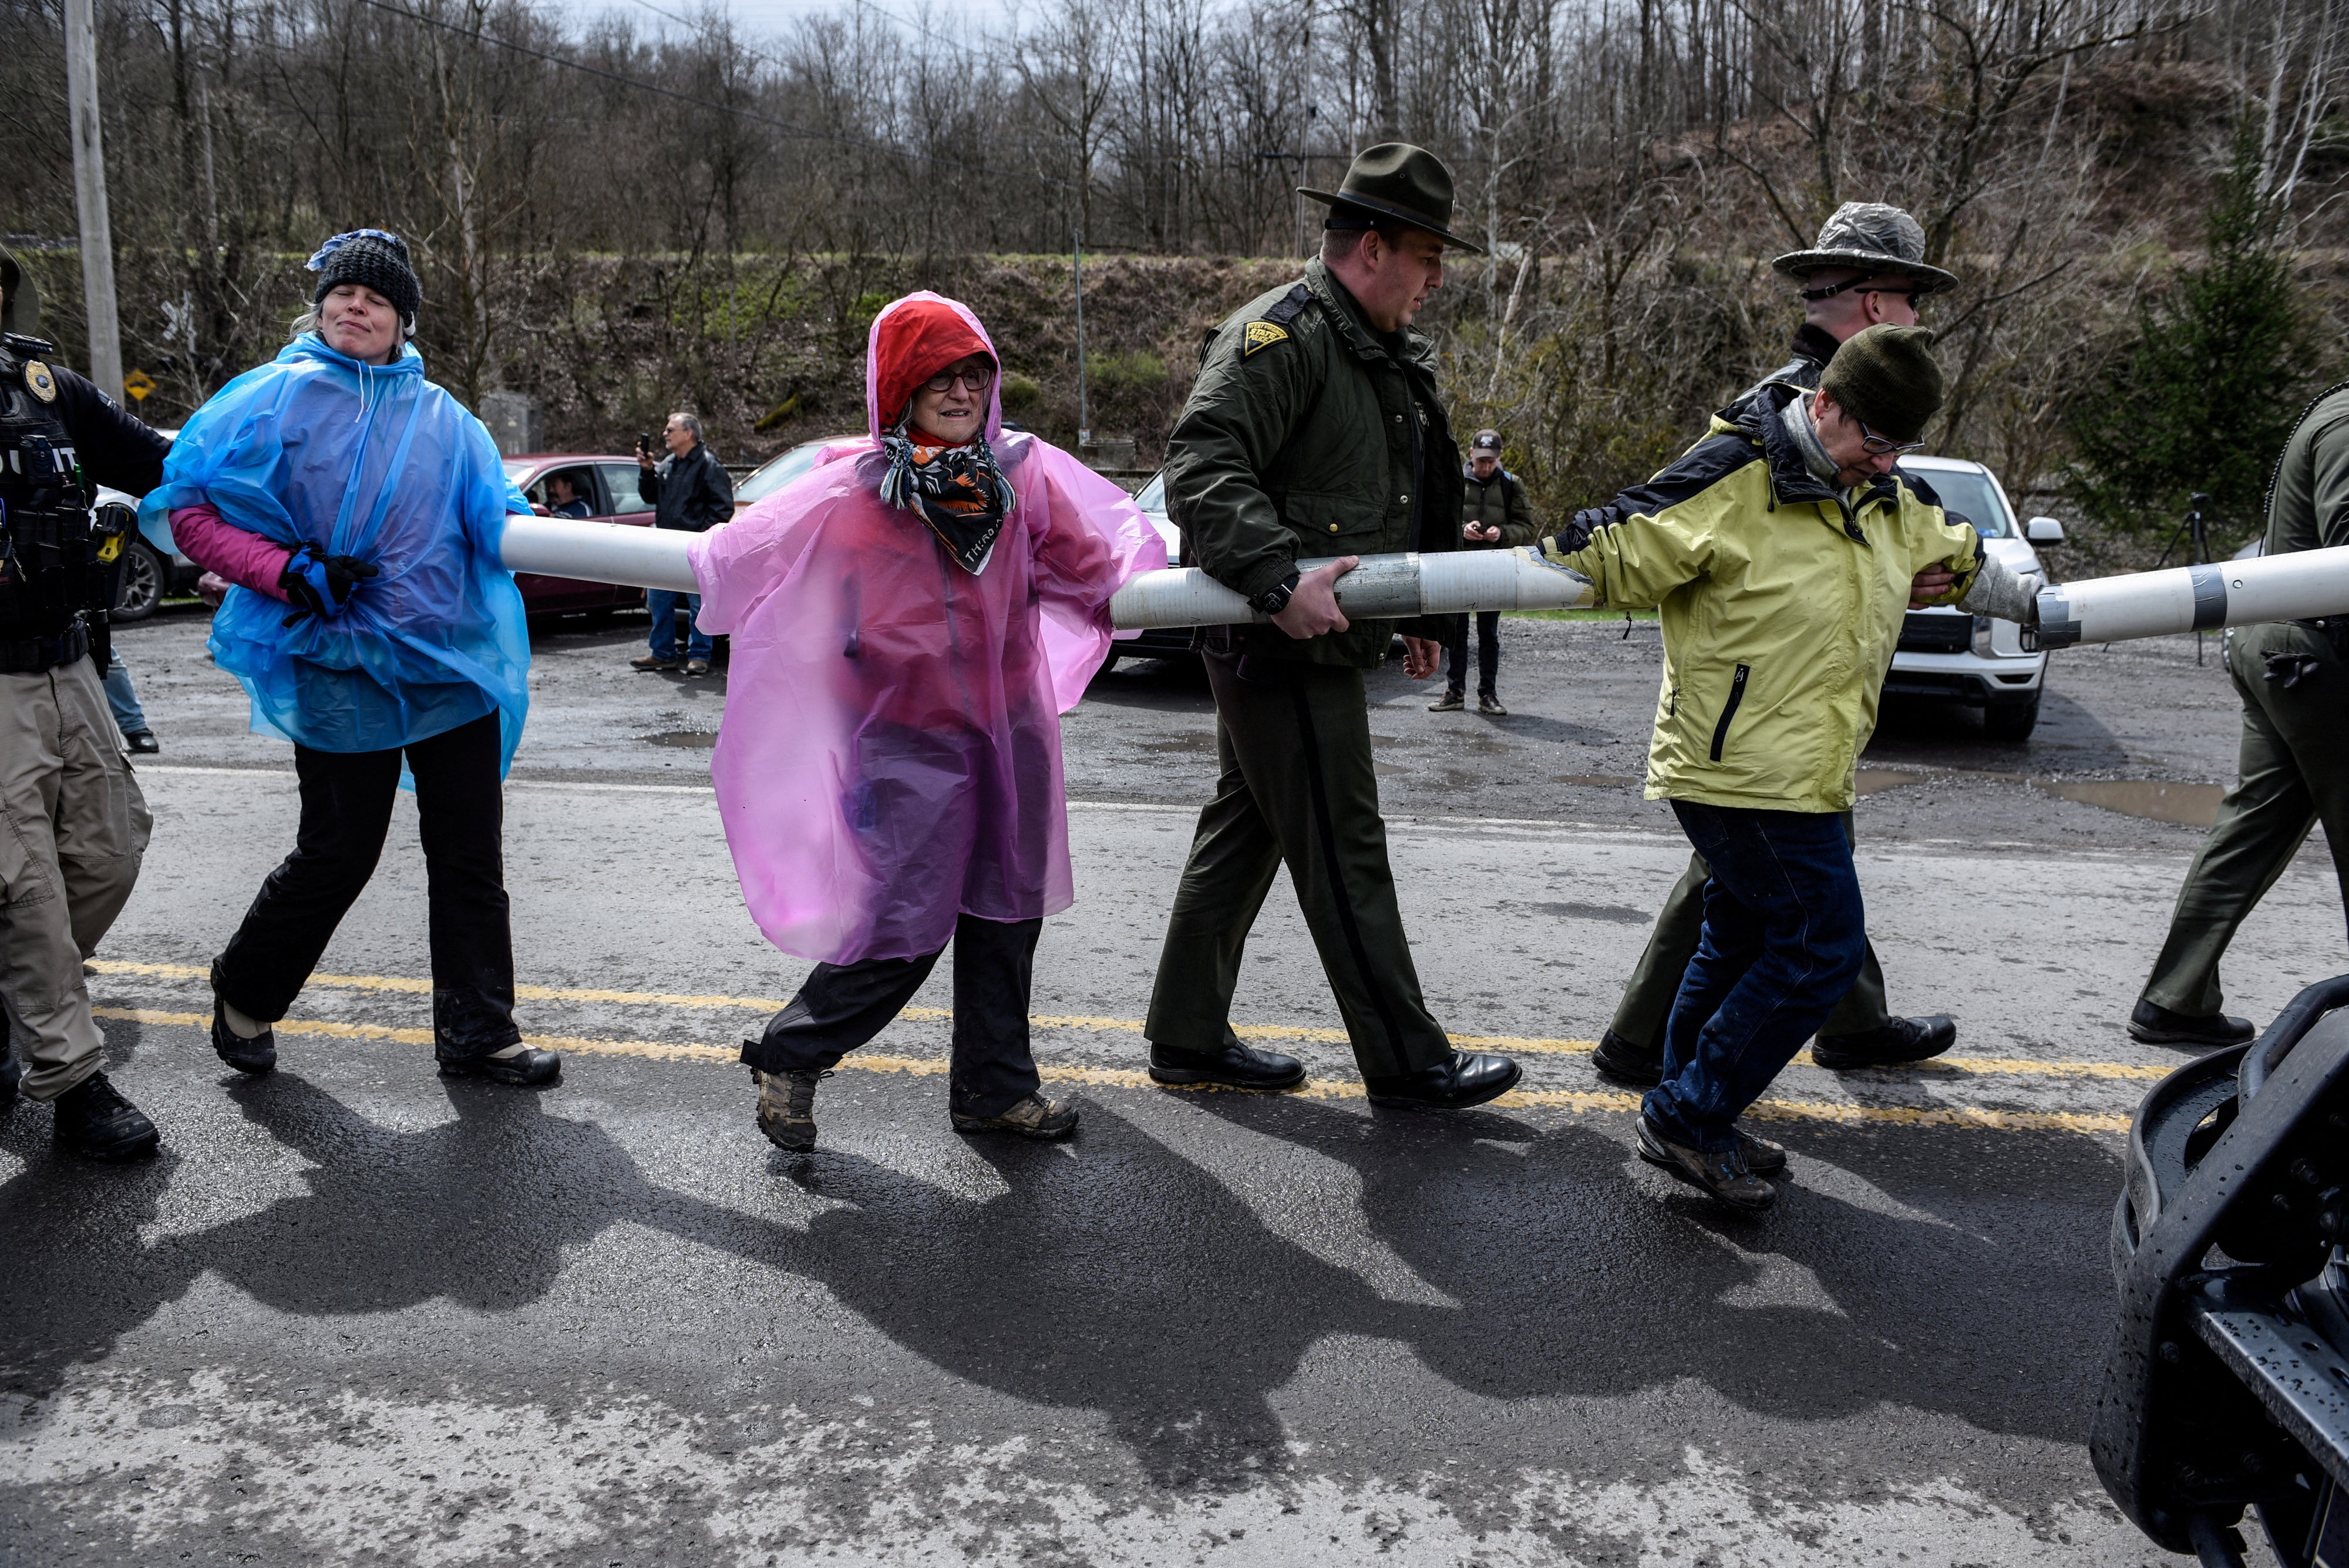 Police lead people away who are chained together during a protest against Senator Joe Manchin as they blockade the Grant Town Coal Waste Power Plant in Grant Town, West Virginia